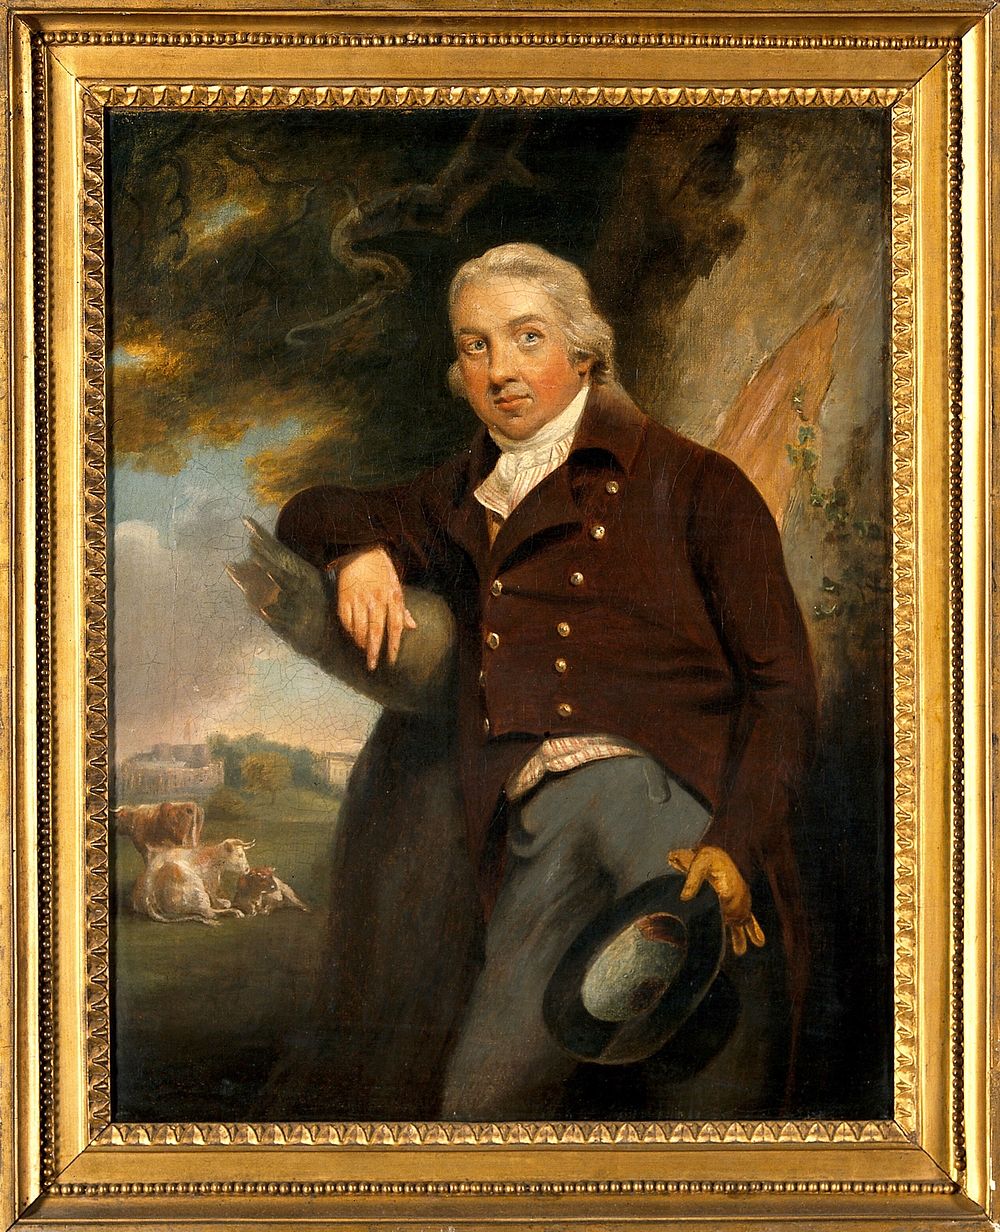 Edward Jenner, with a view of Berkeley, Glos. Oil painting attributed to John Raphael Smith.